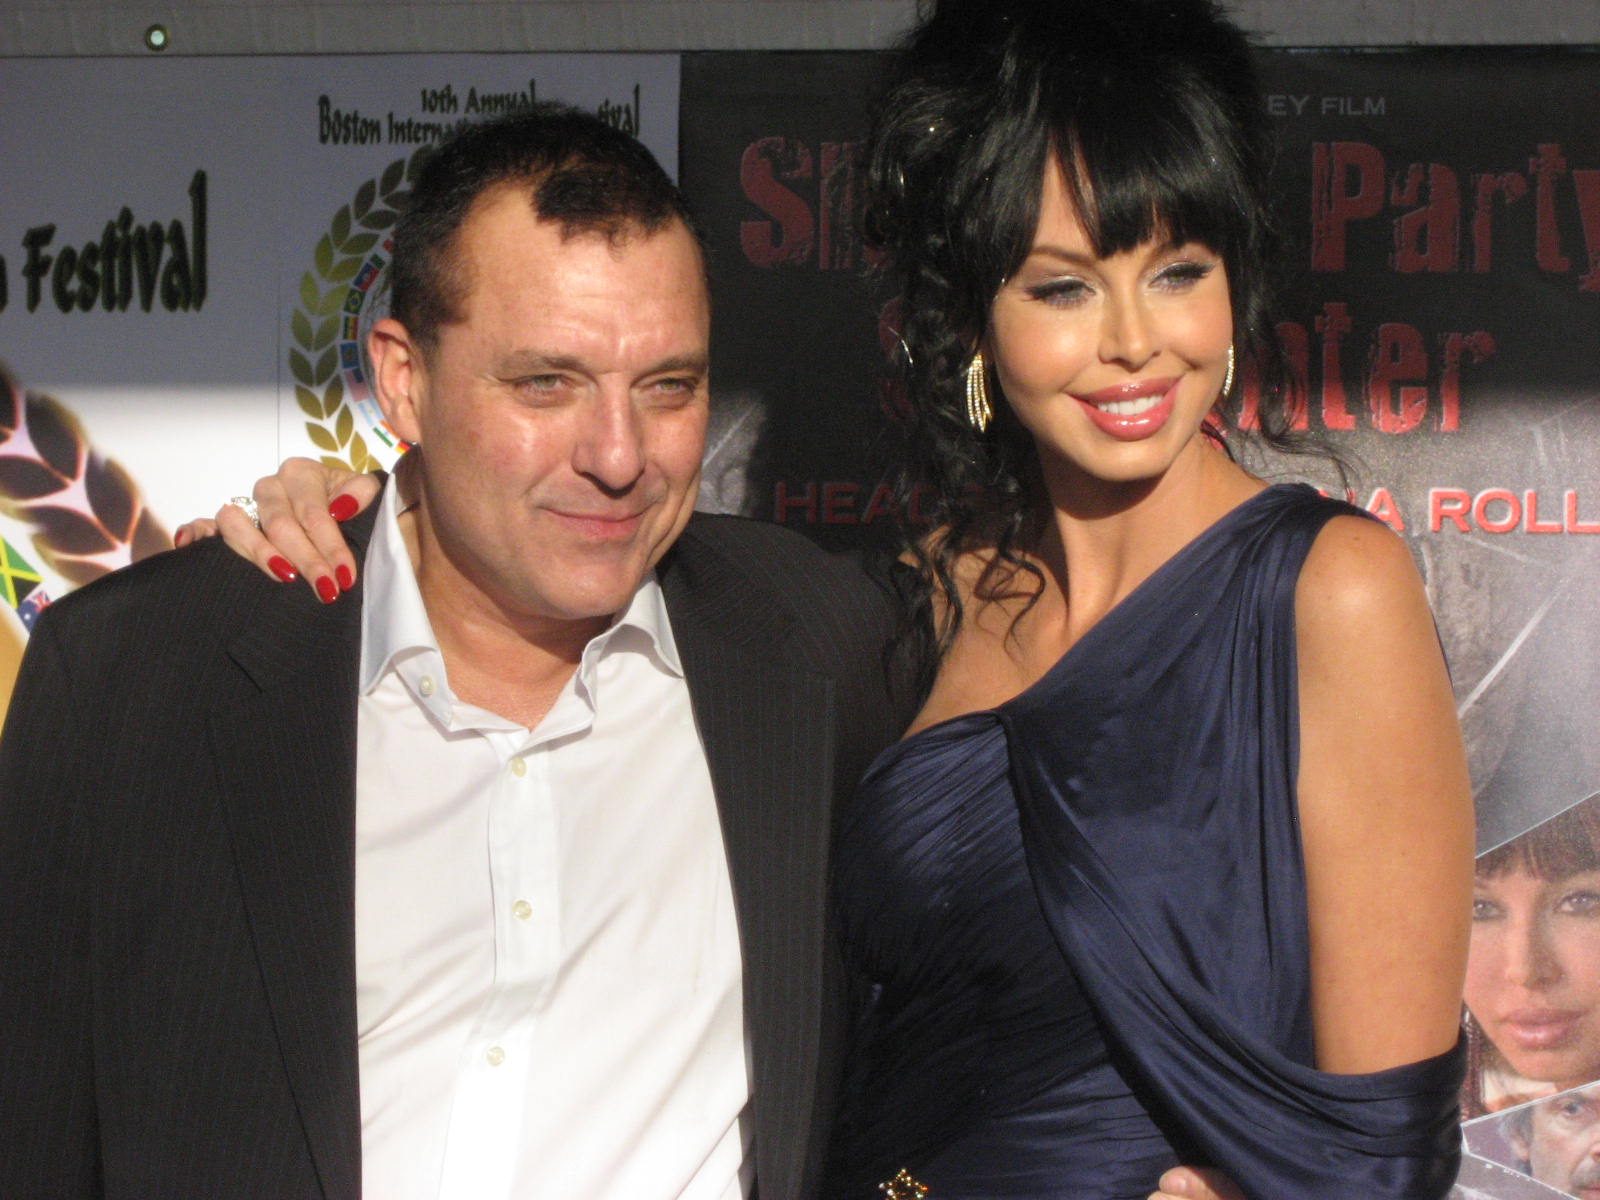 Tom Sizemore and Rebekah Chaney at Boston Festival.